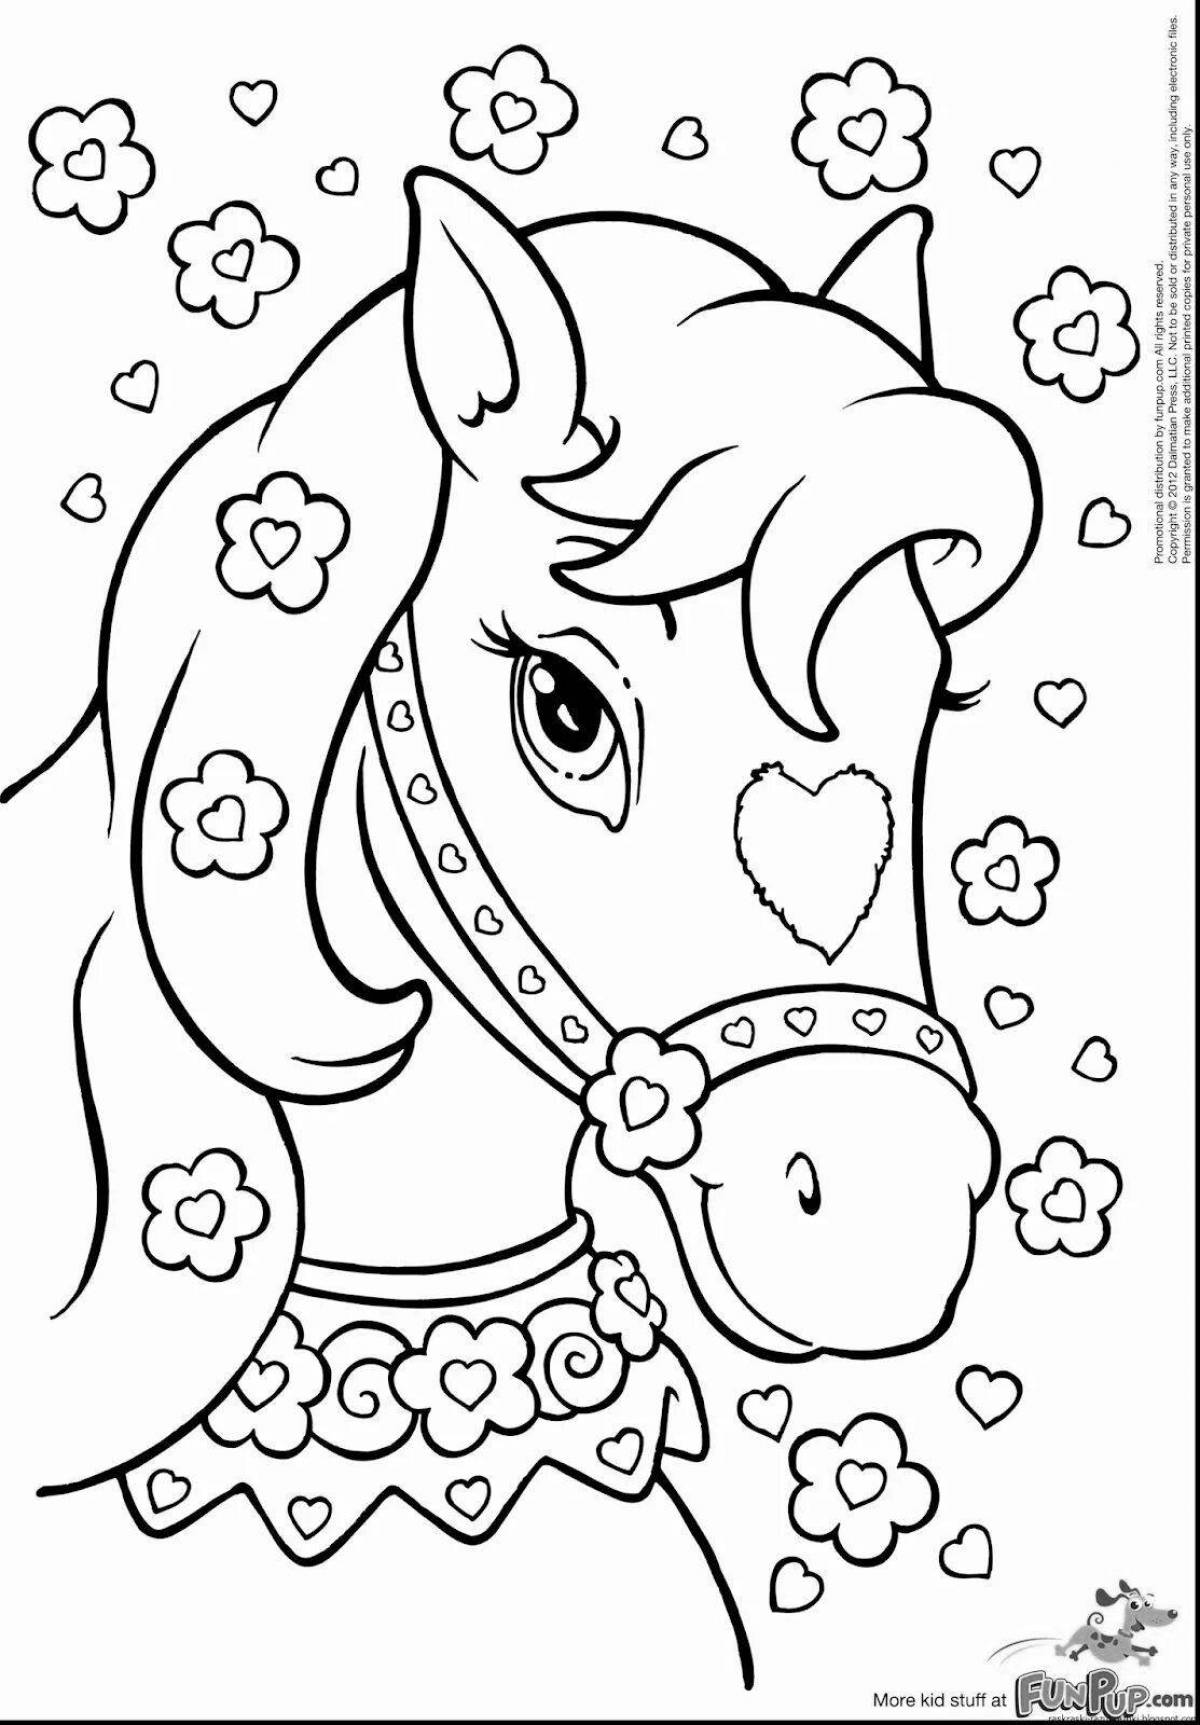 A fun coloring game for 4-5 year olds for girls